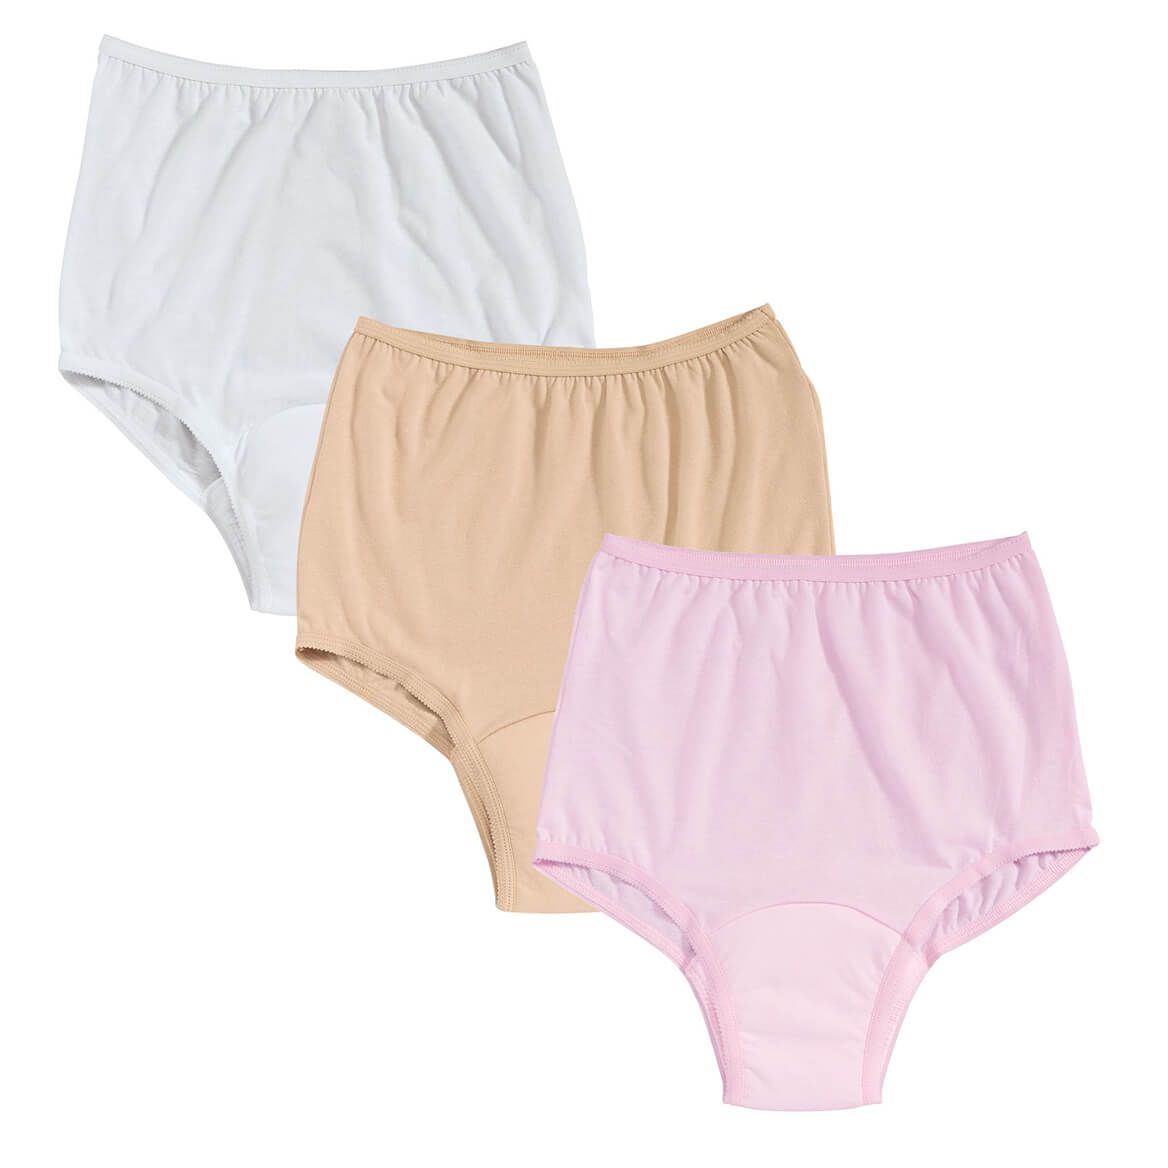 Colored Incontinence Panties, Pack Of 3 + '-' + 335704